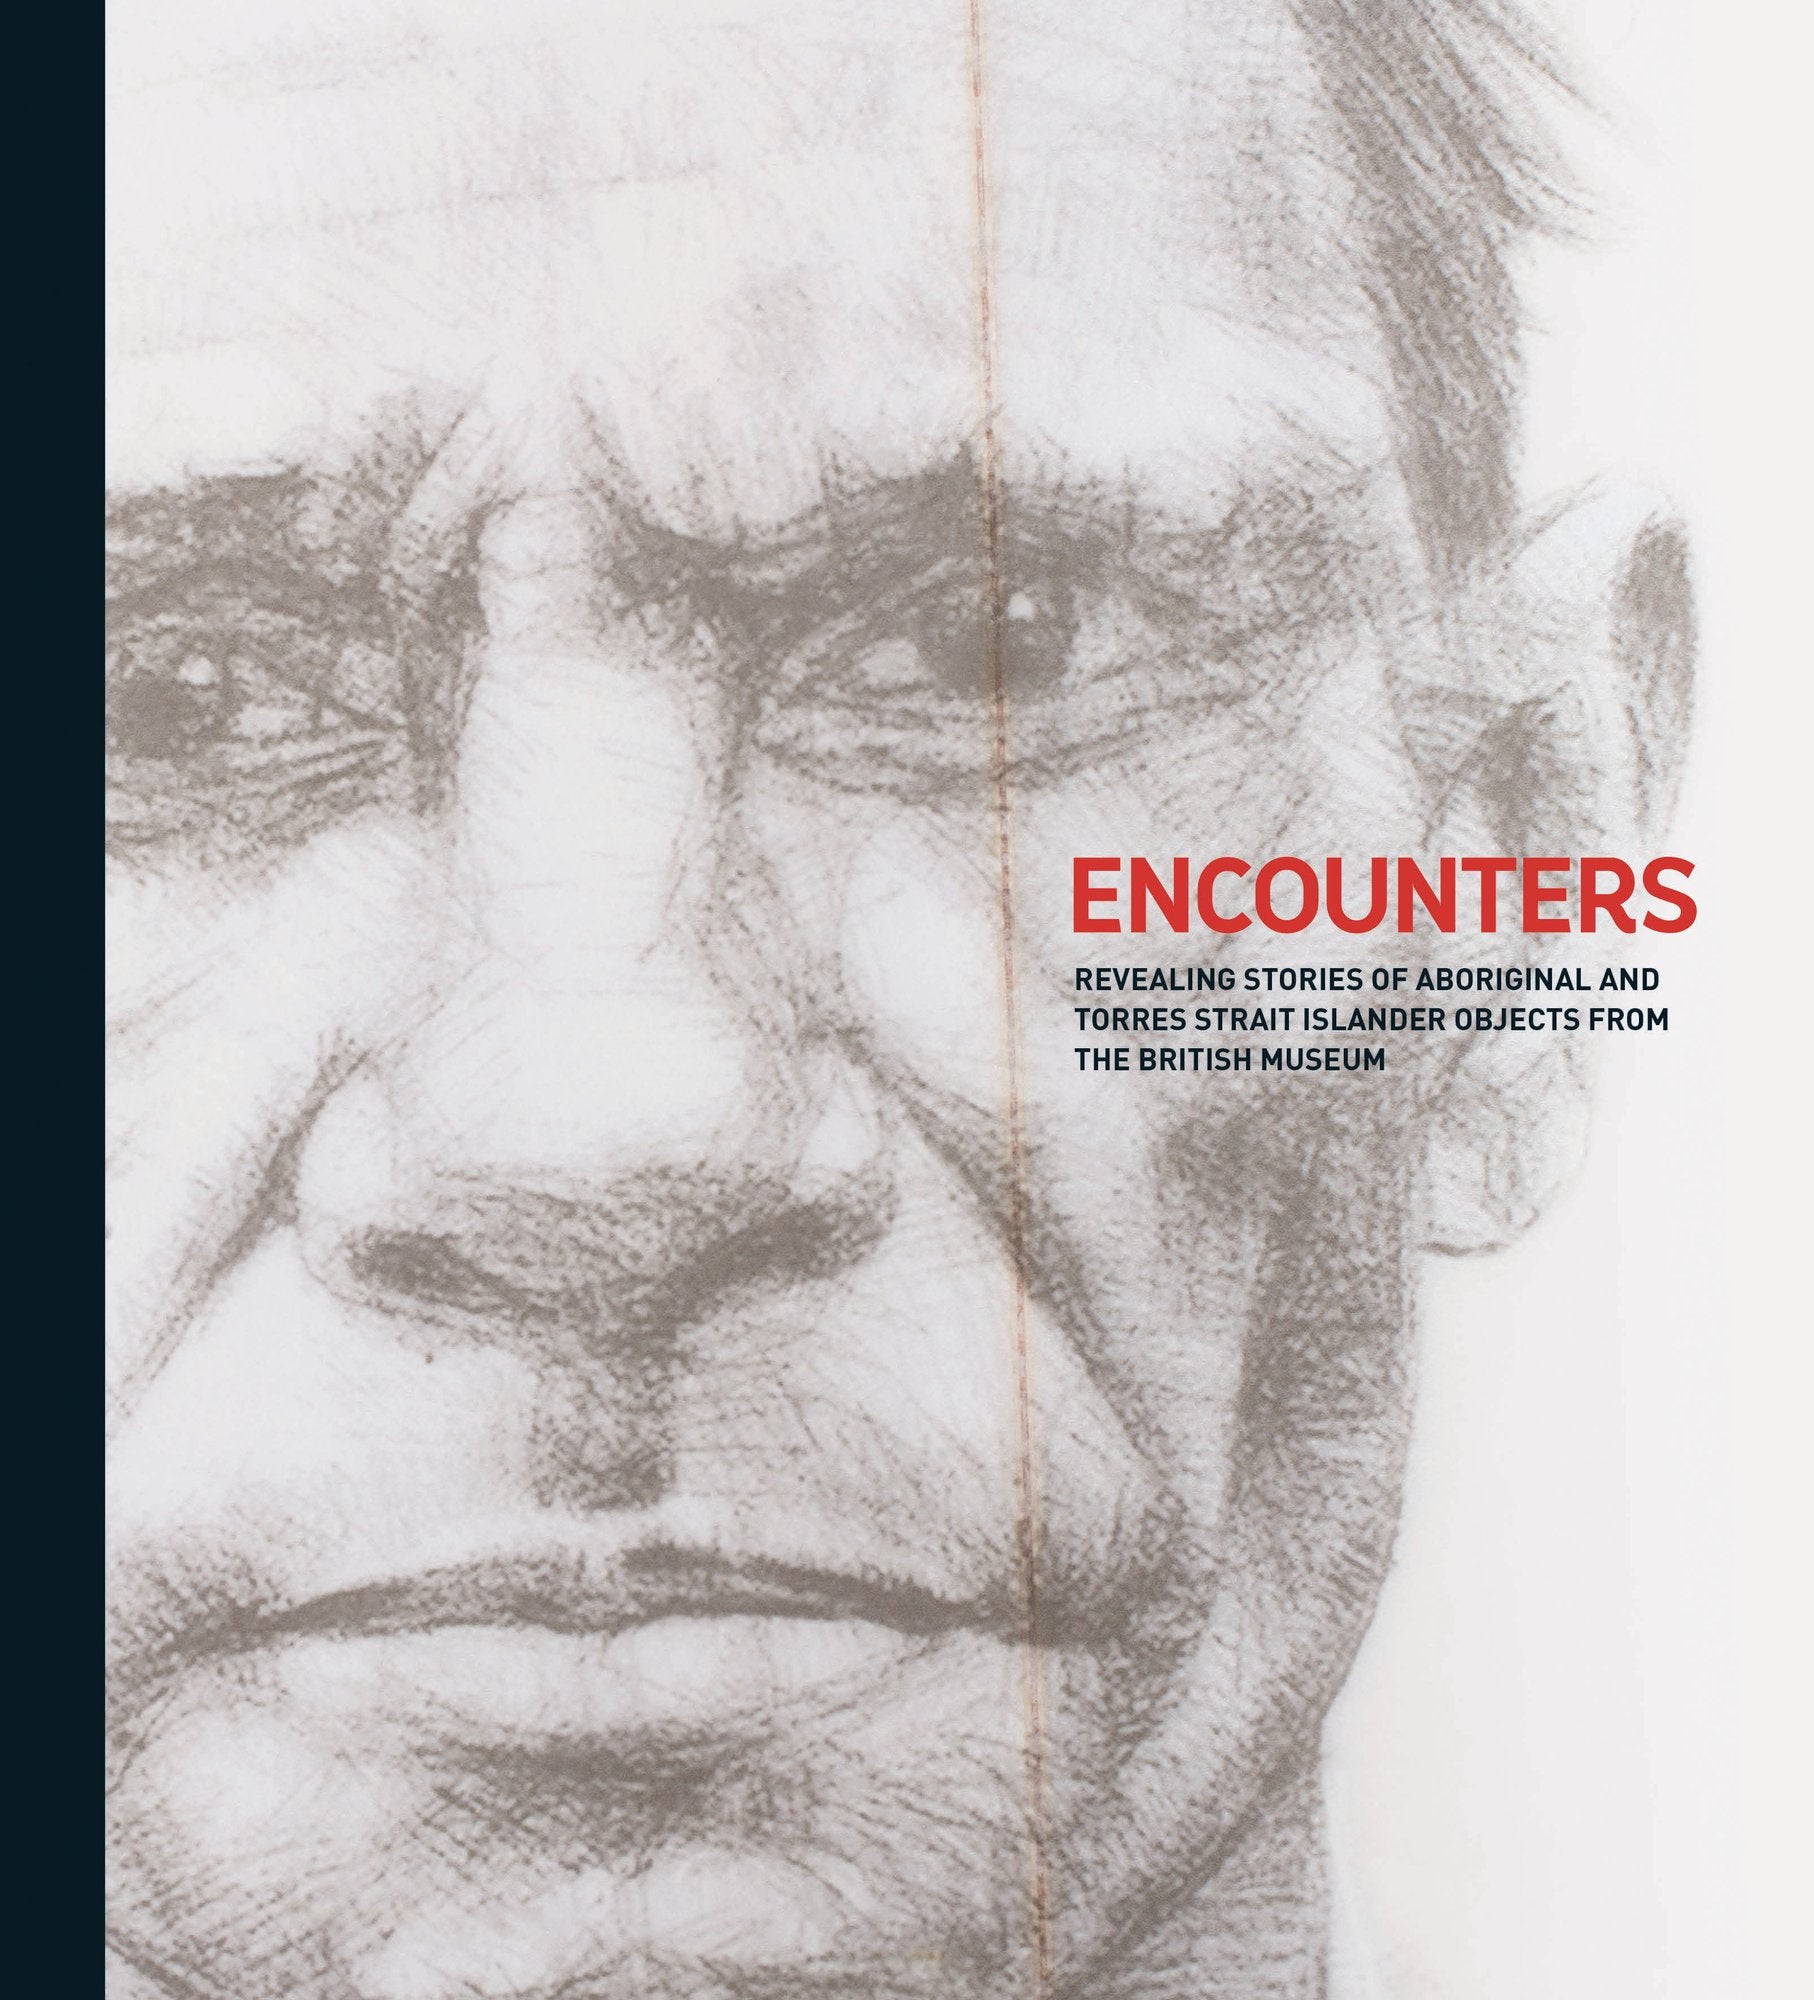 Encounters: Revealing Stories of Aboriginal and Torres Strait Islander Objects from the British Museum